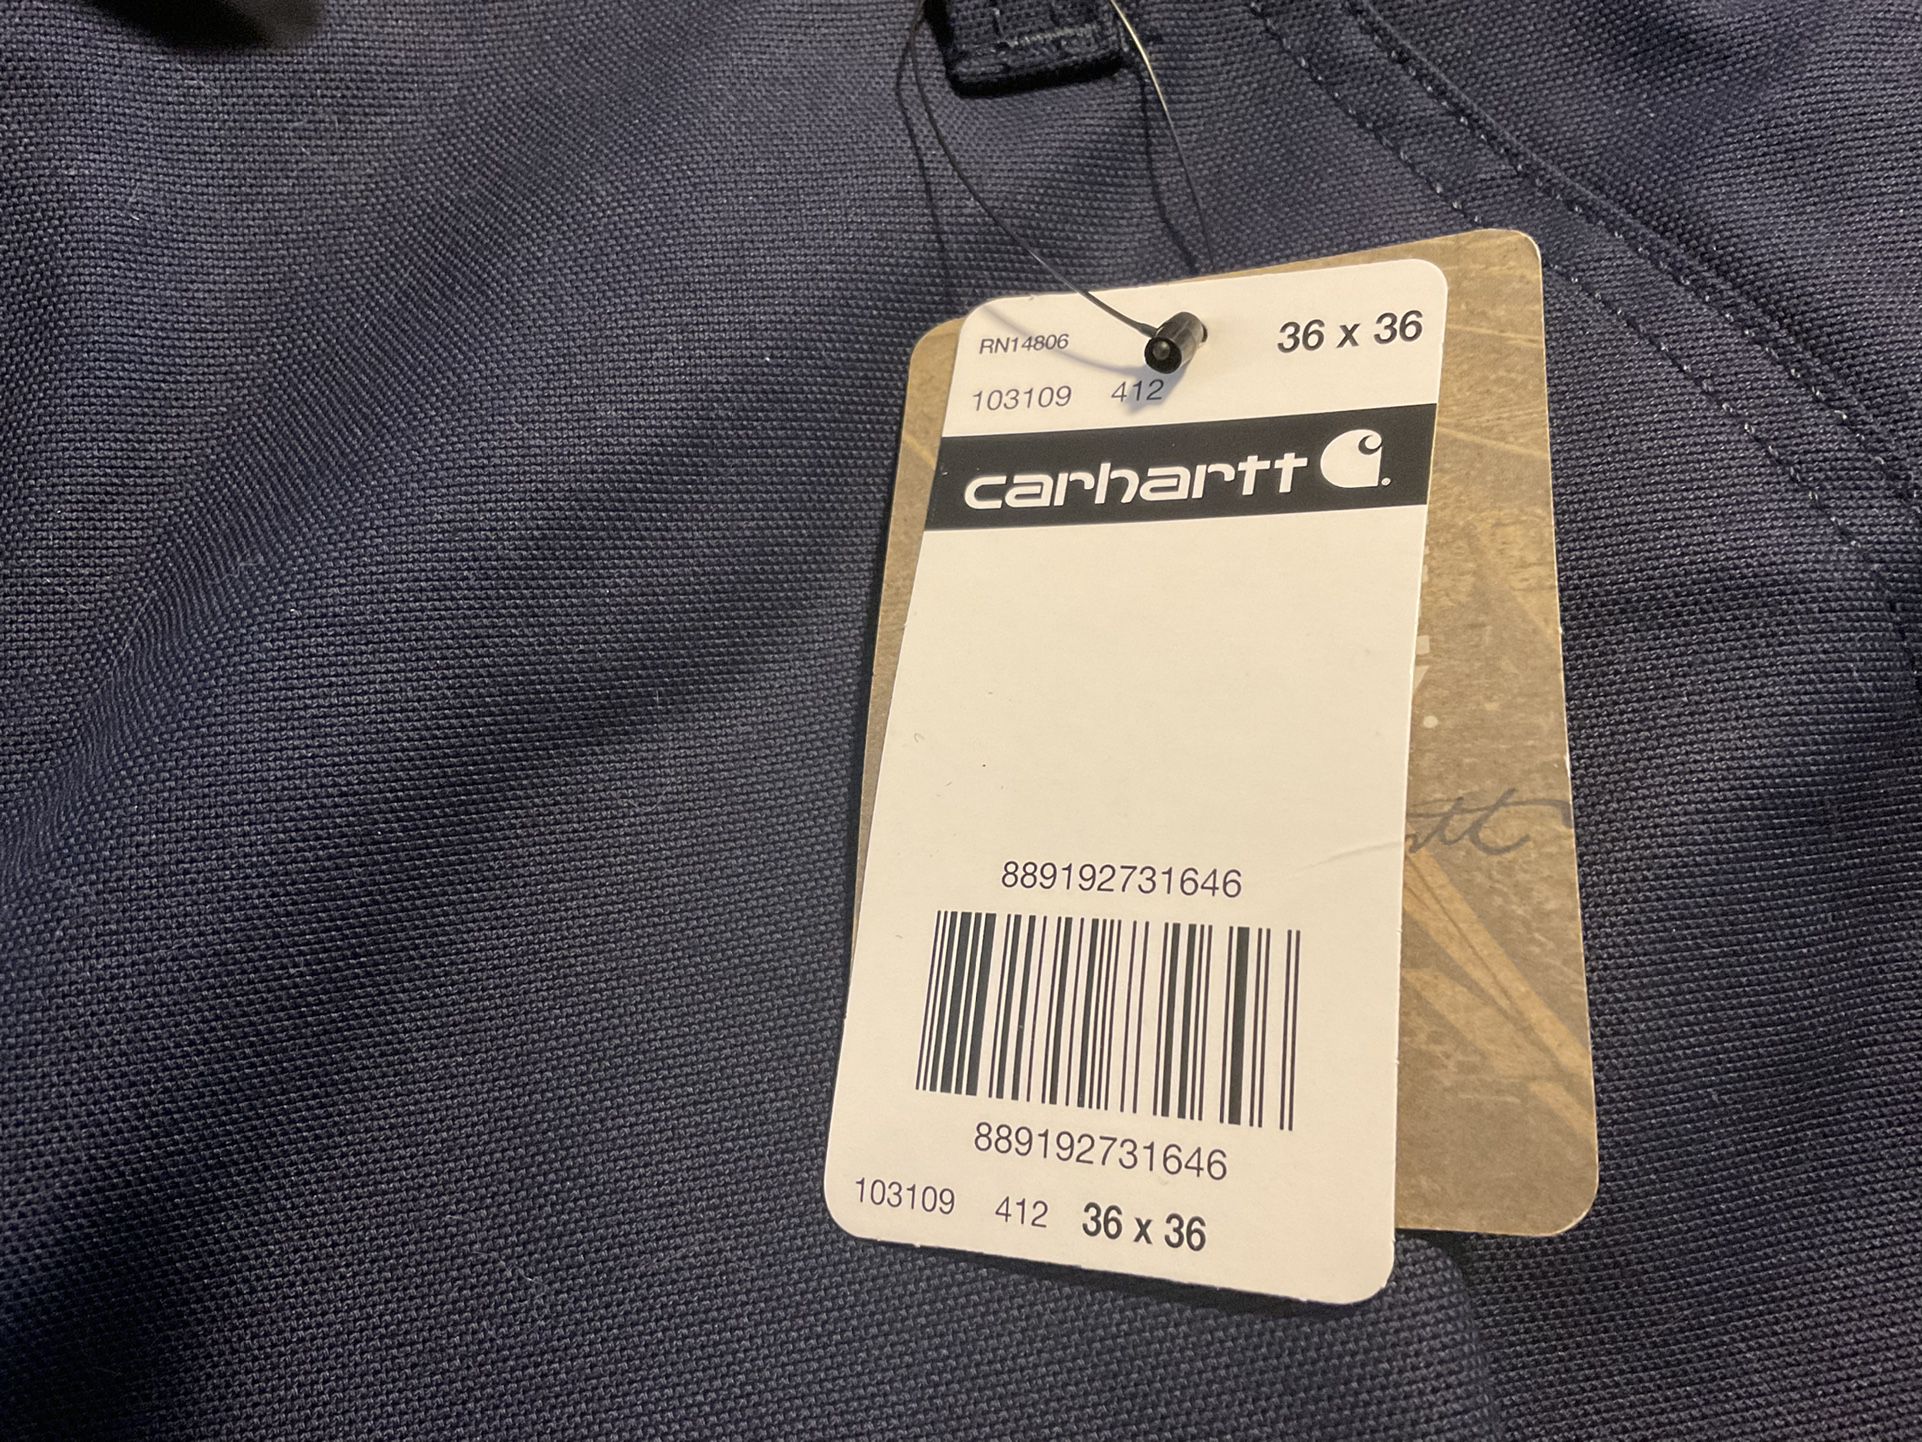 Carhartt Pants Men 36x36 Chino Relaxed Navy Blue Rugged Professional 103109 412